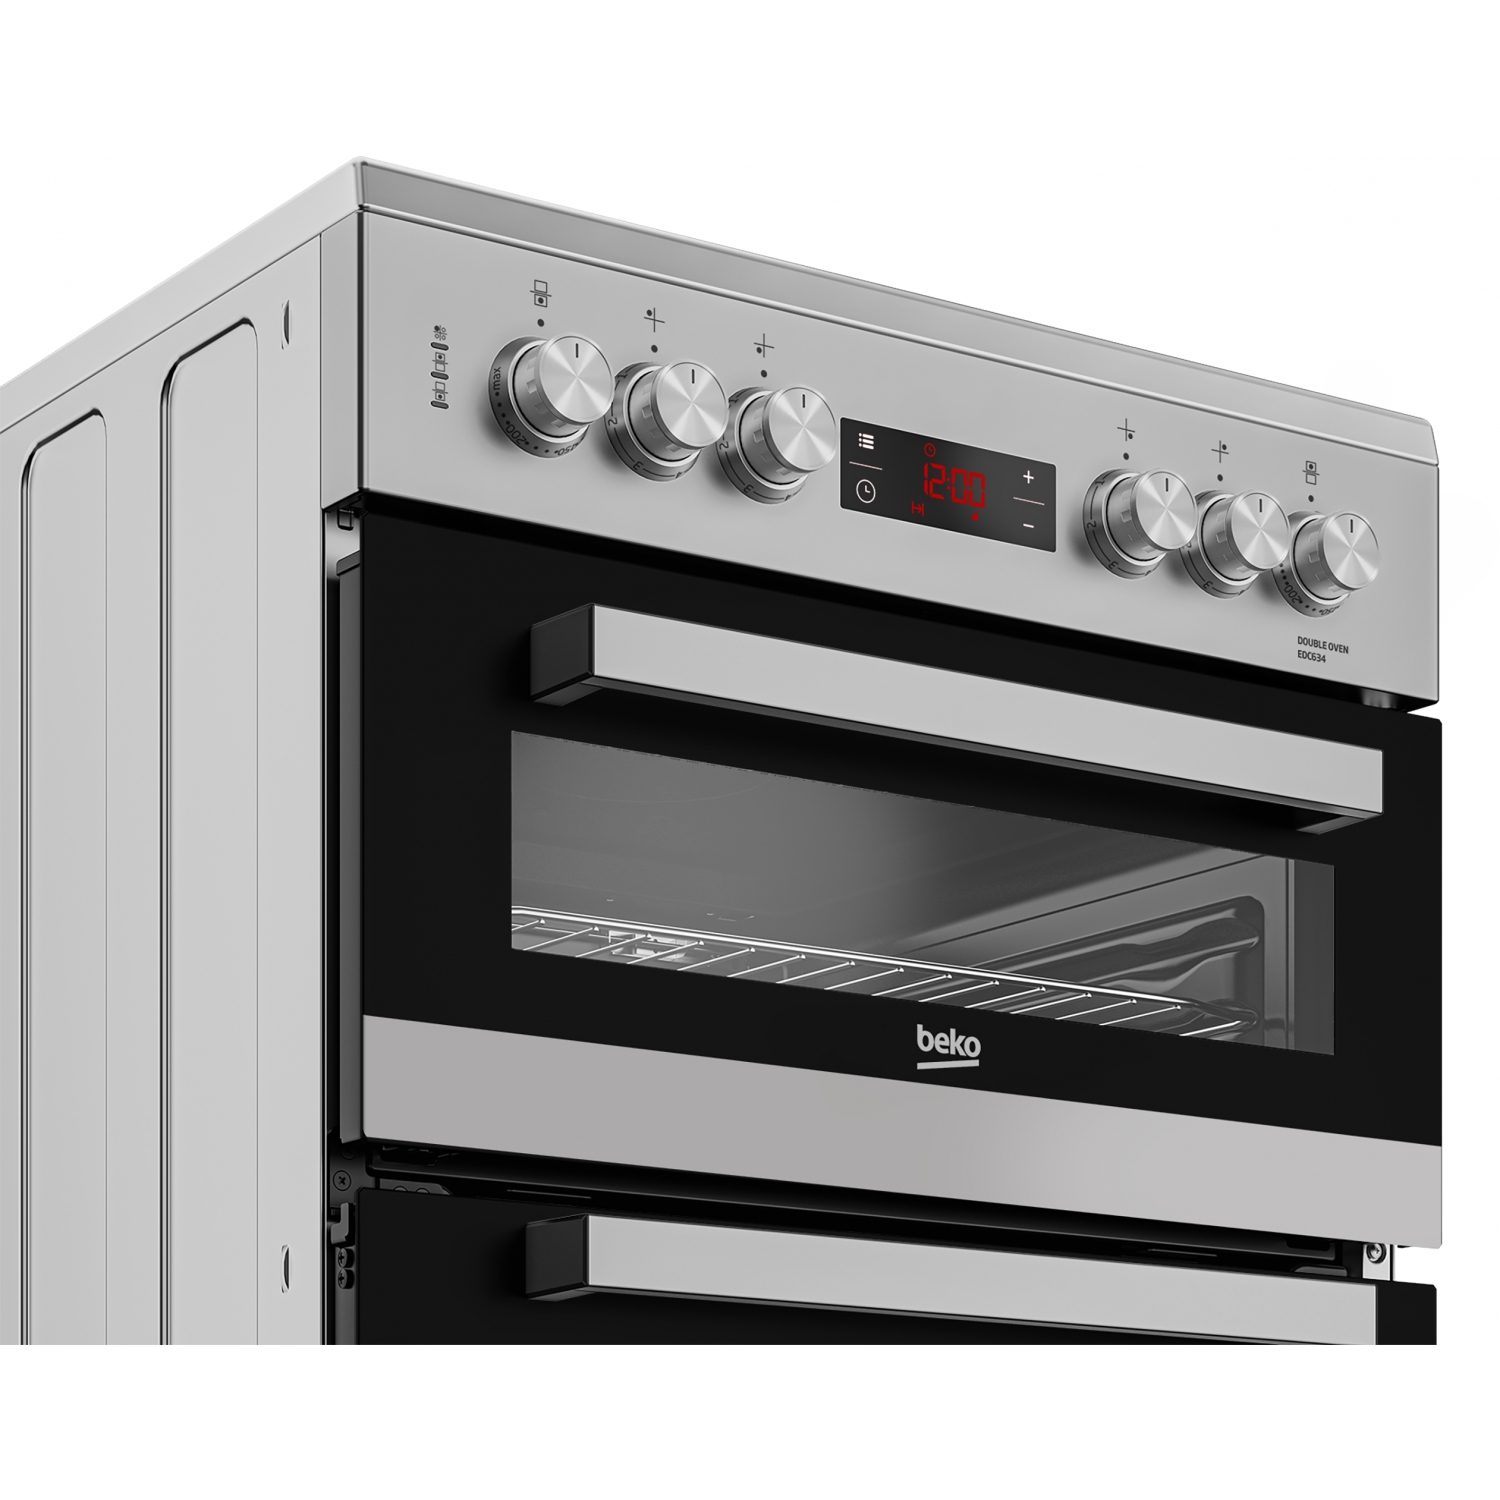 Beko EDC634S 60cm Double Oven Electric Cooker with Ceramic Hob - Silver - 1